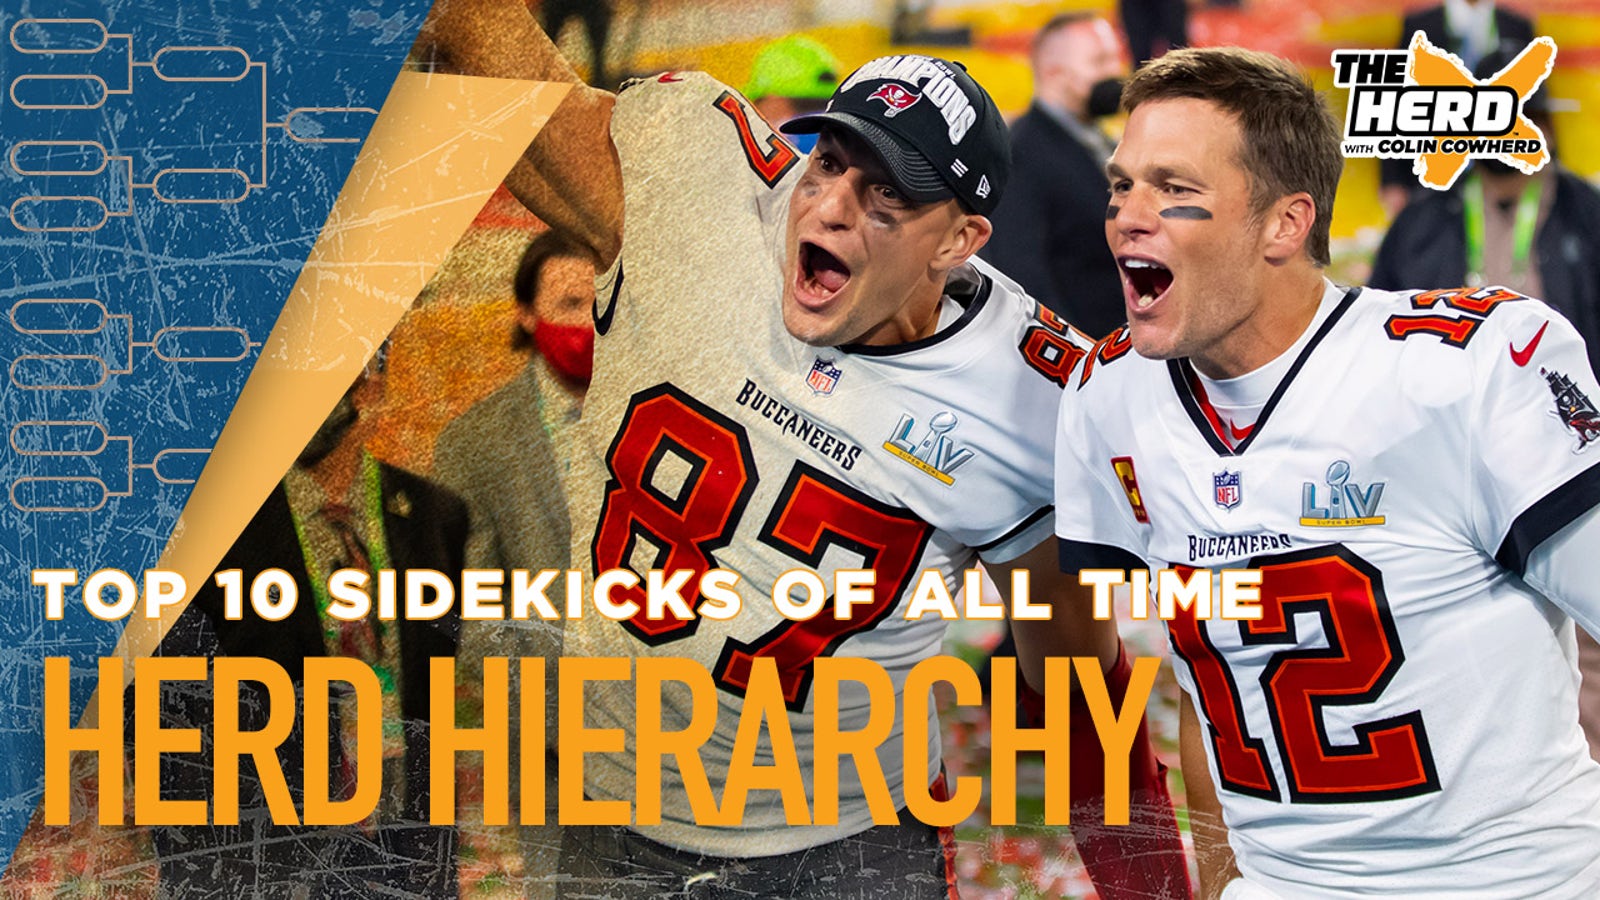 Herd Hierarchy: Colin Cowherd ranks the 10 best sidekicks of all time ' THE HERD